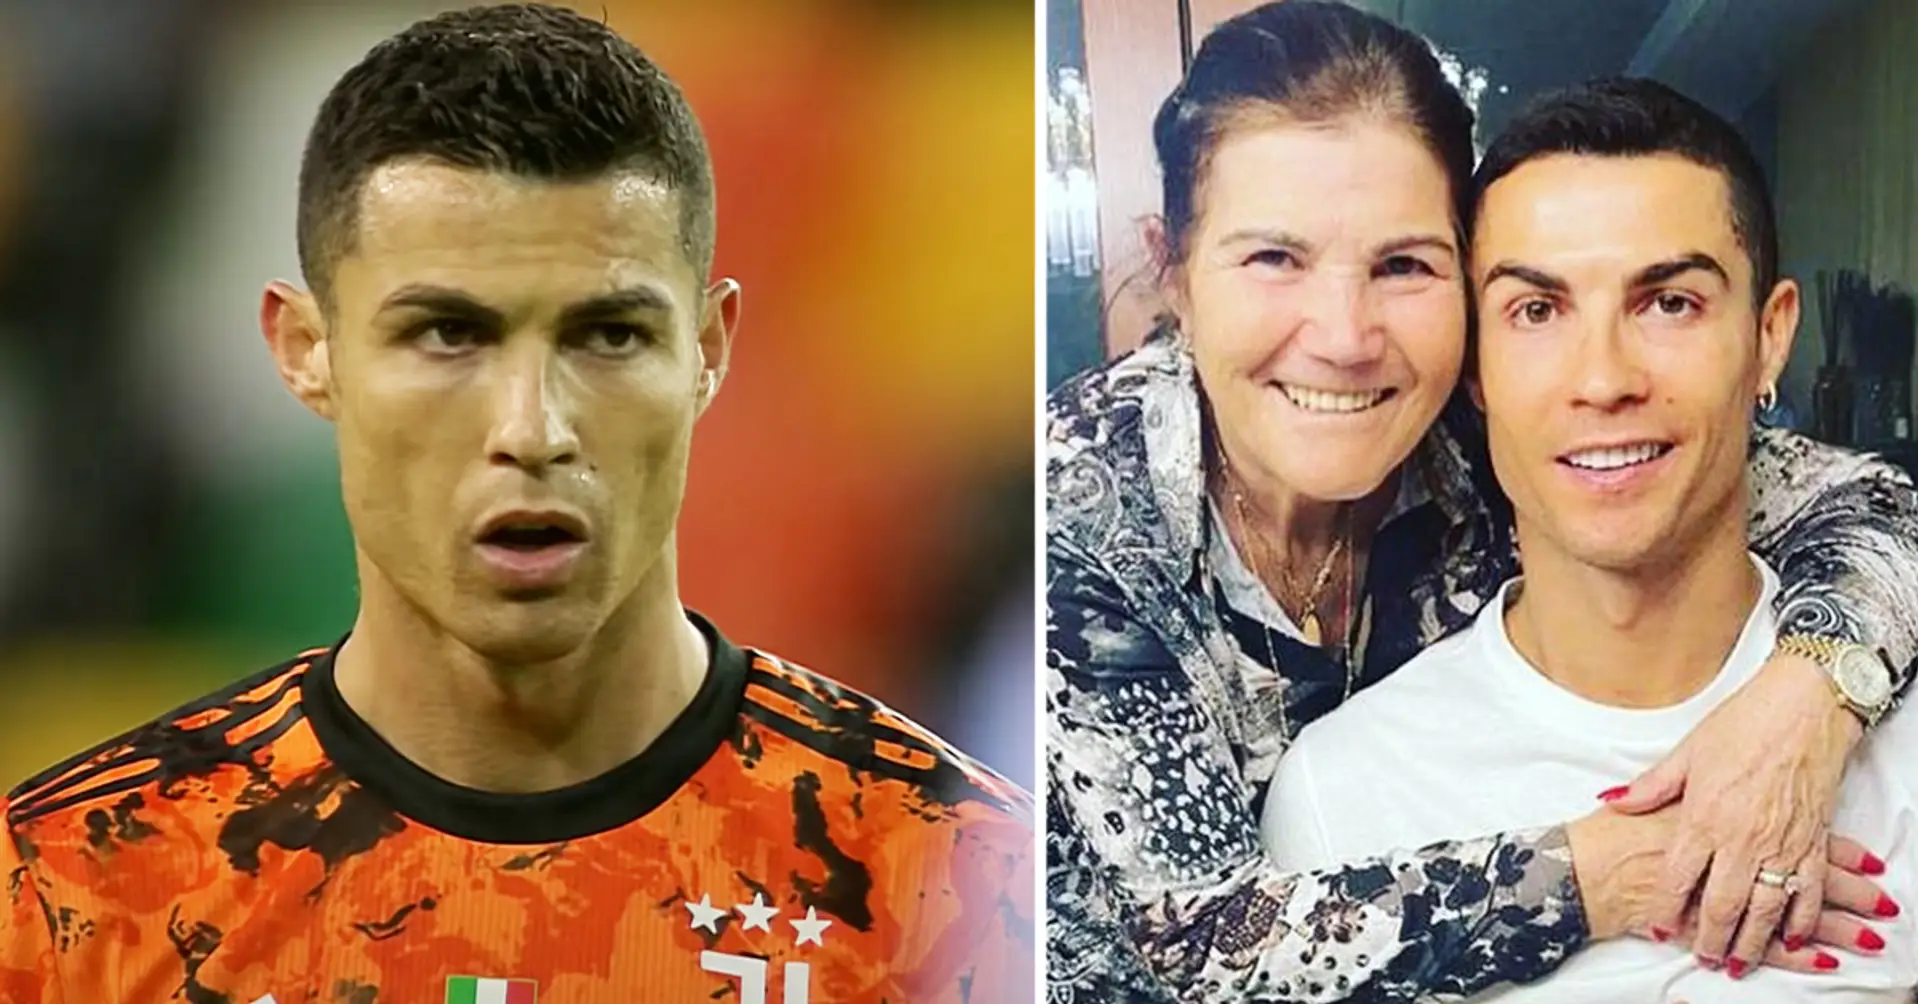 Ronaldo's mother Dolores: I'm going to Turin. I'm talking to Cristiano, he will play for Sporting next season